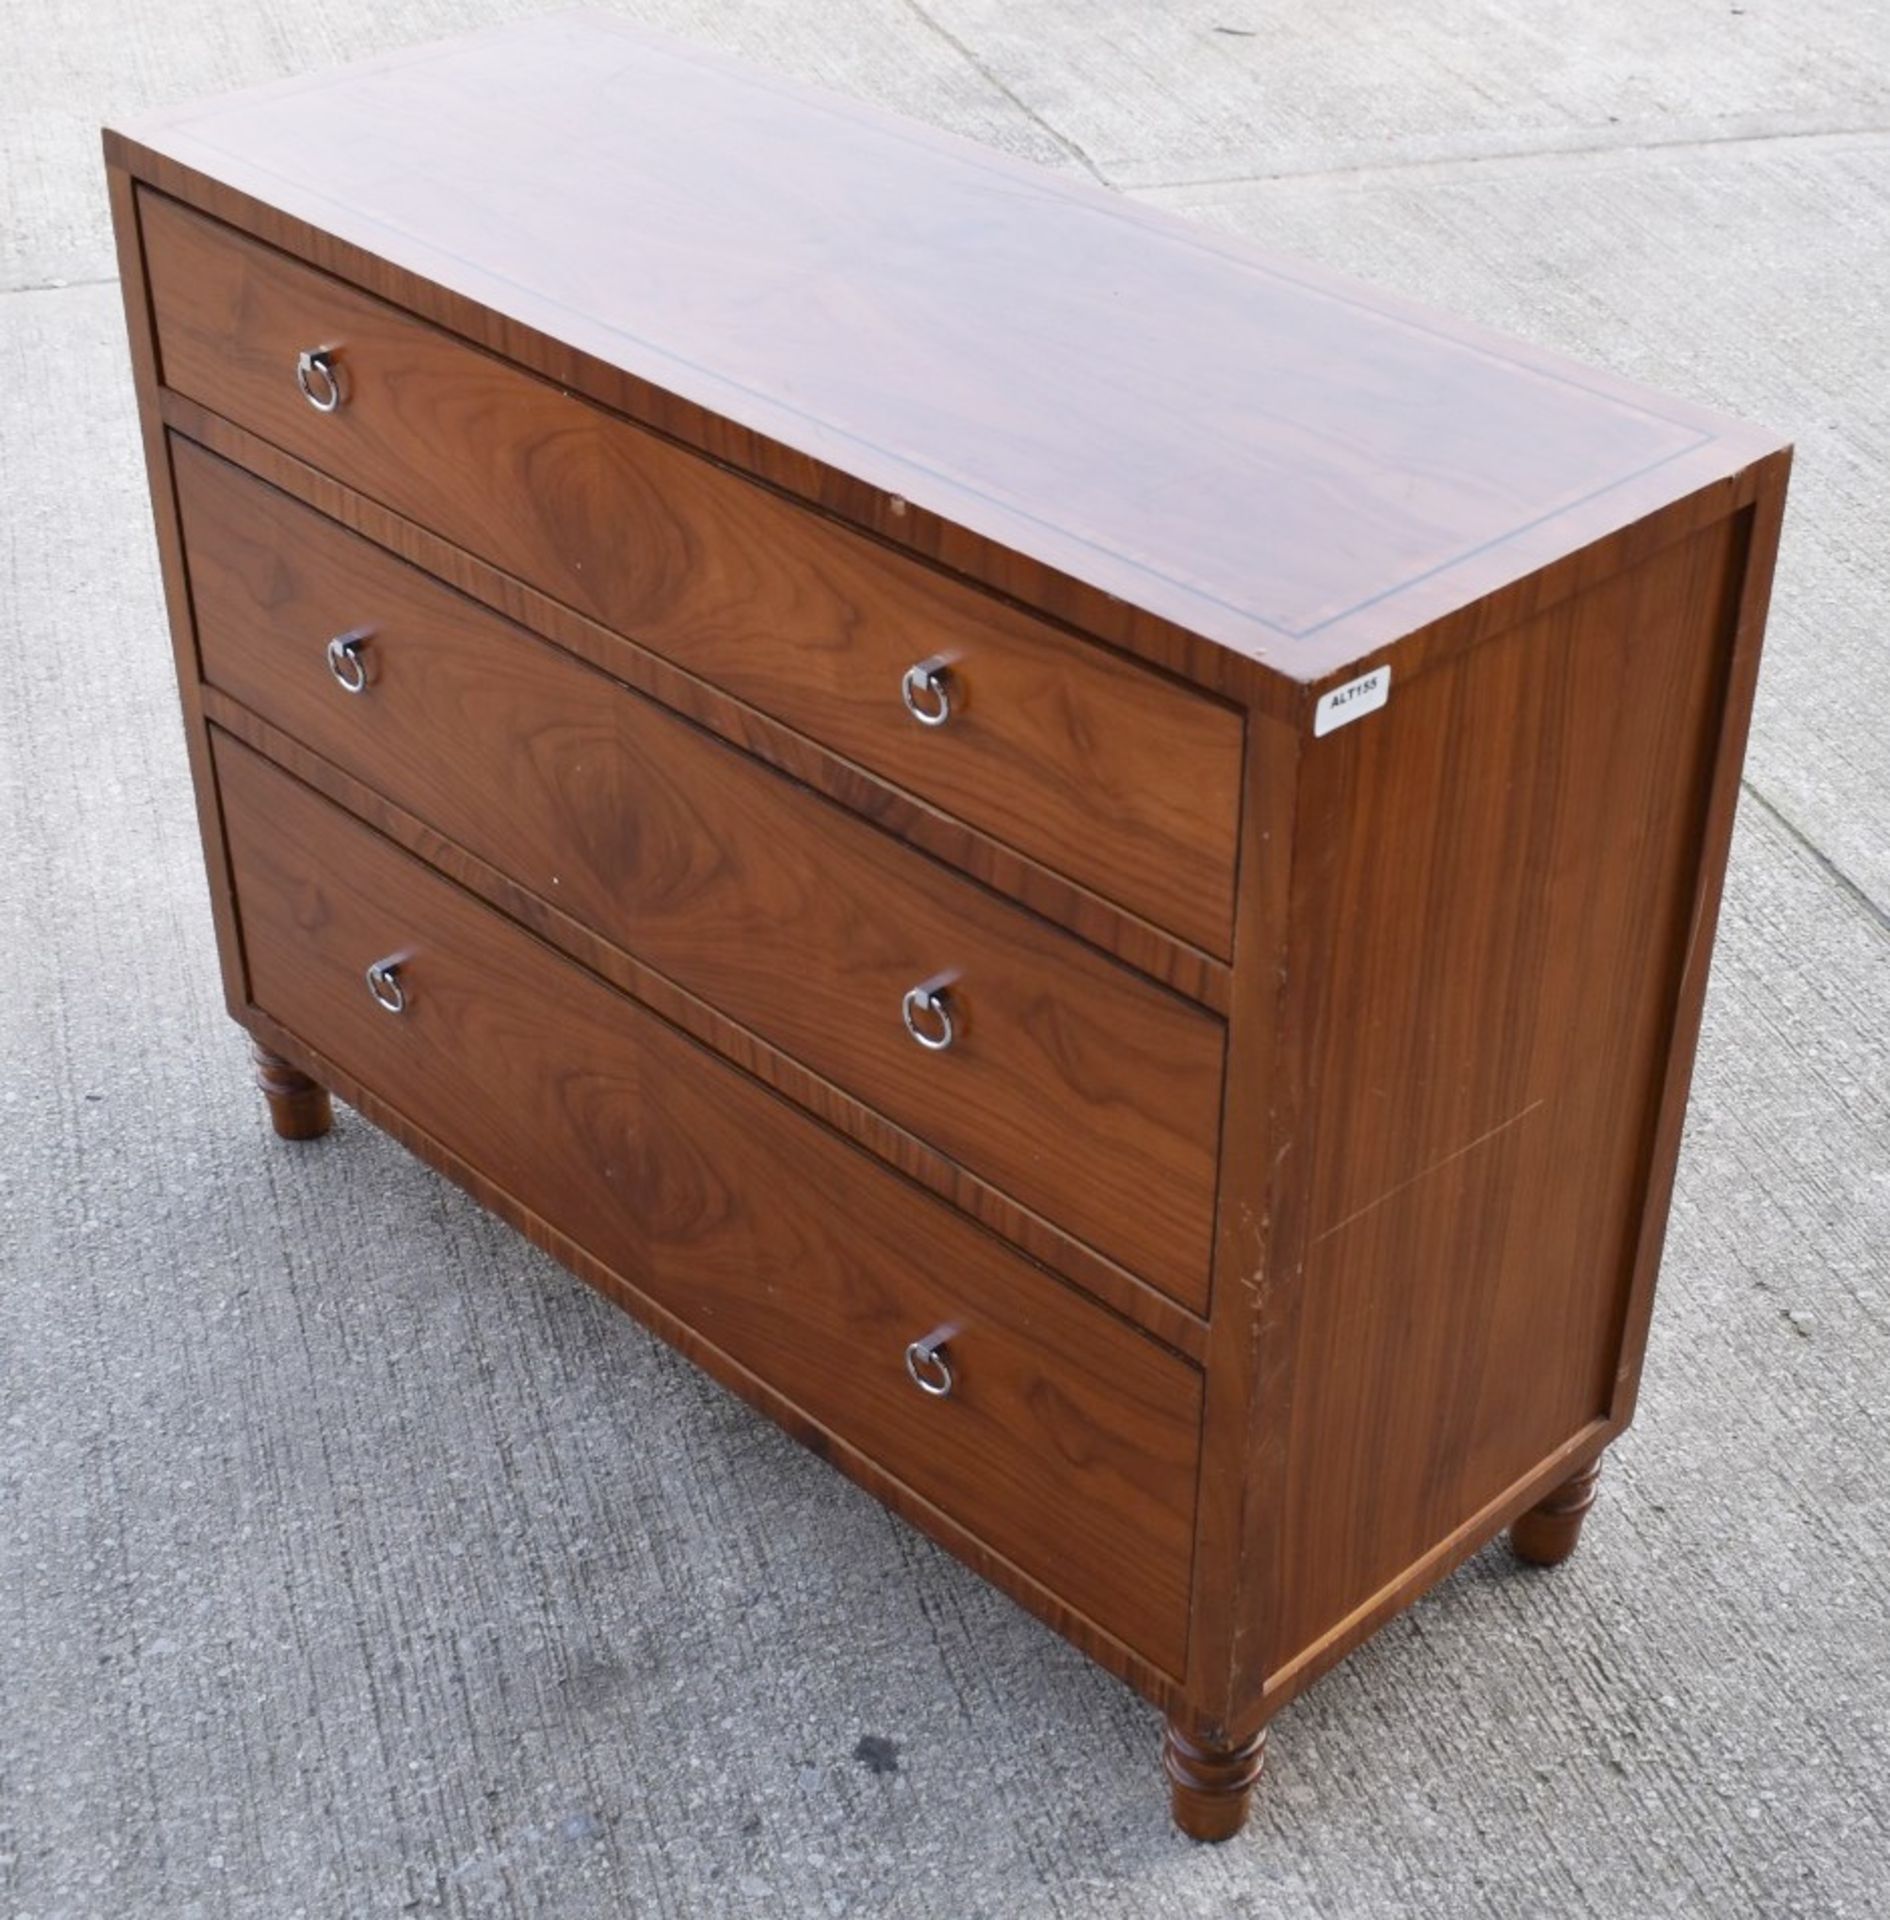 1 x CHANNELS Handcrafted Wooden 3-Door Chest - Recently Procured From A Luxury 5-Star Hotel - Ref: - Image 3 of 5